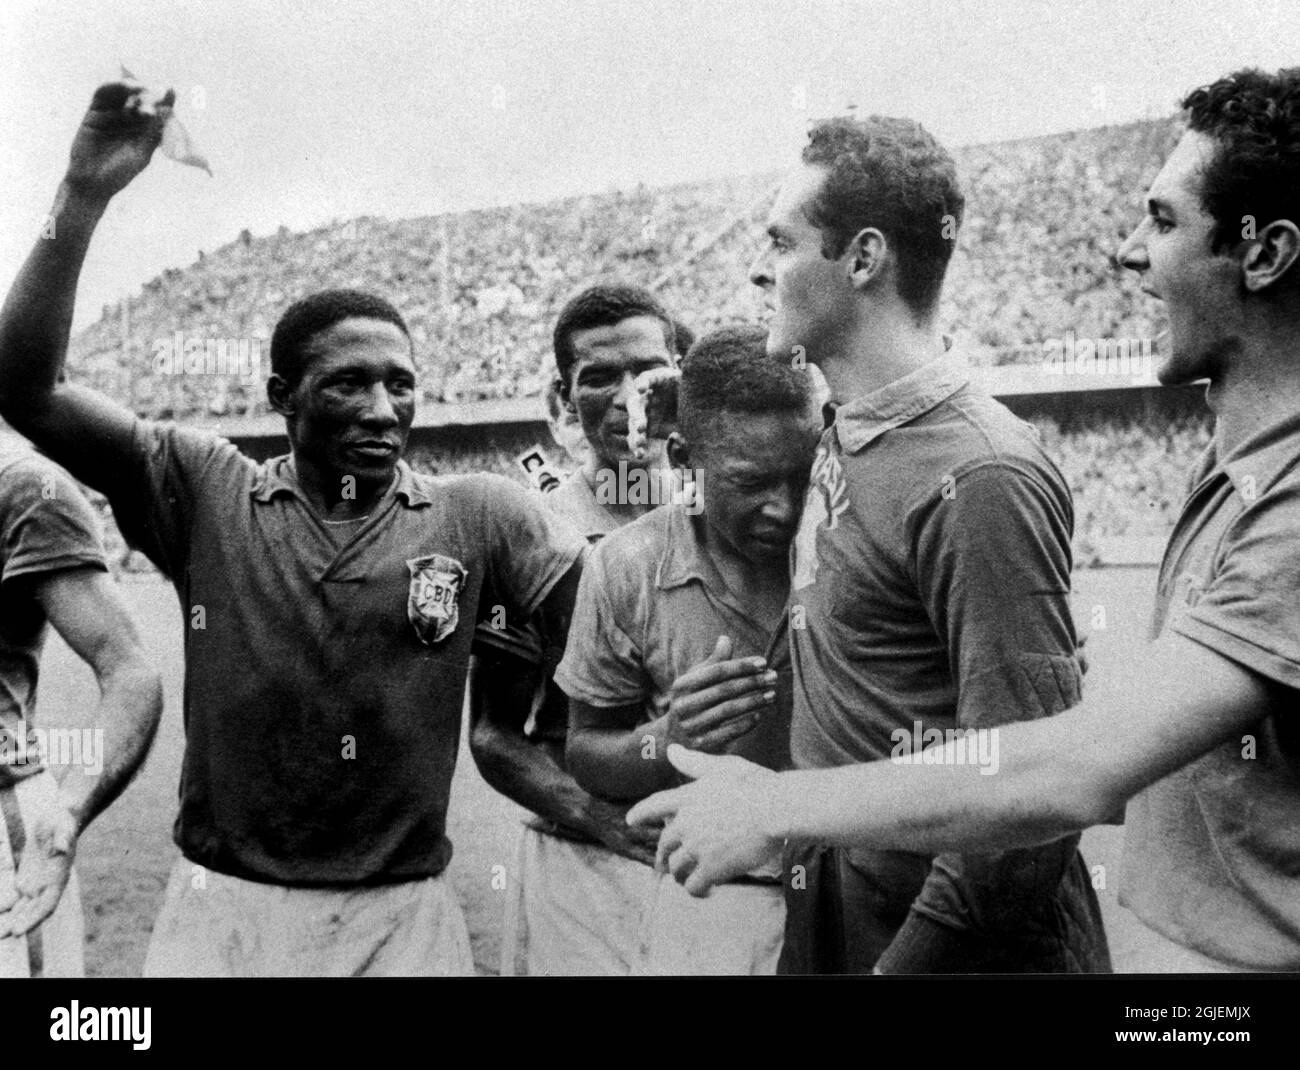 The 1958 FIFA World Cup football finalsbetween Sweden and Brazil held at Rasunda stadium, Sweden. PelÃ© in tears, after Brazils fifth goal in the last minute, and is comforted by goal keeper Gylmar. Brazil won the final 5-2 and became World Champions. Stock Photo